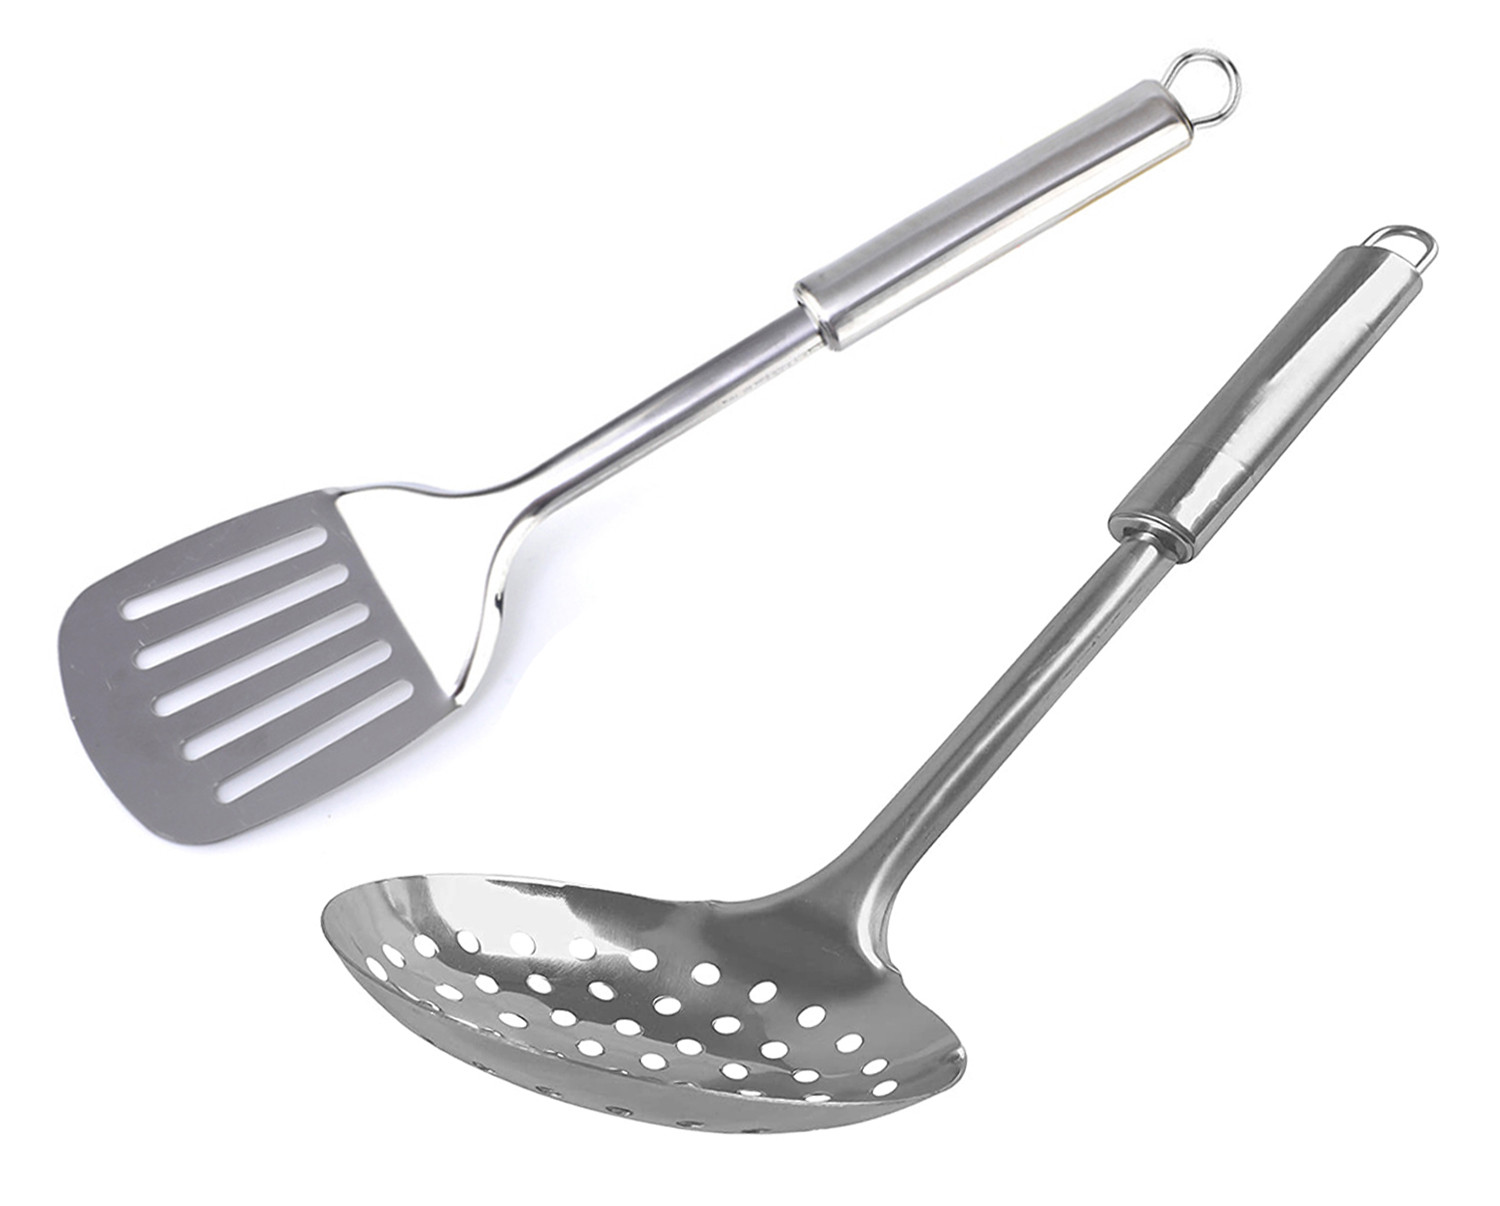 Kuber Industries Stainless Steel Kitchen Utensil Set of 2 (Slotted Turner & Skimmer) Cooking Utensils - Nonstick Kitchen Utensils Cookware Set Best Kitchen Gadgets Kitchen Tool Set Gift (Silver)